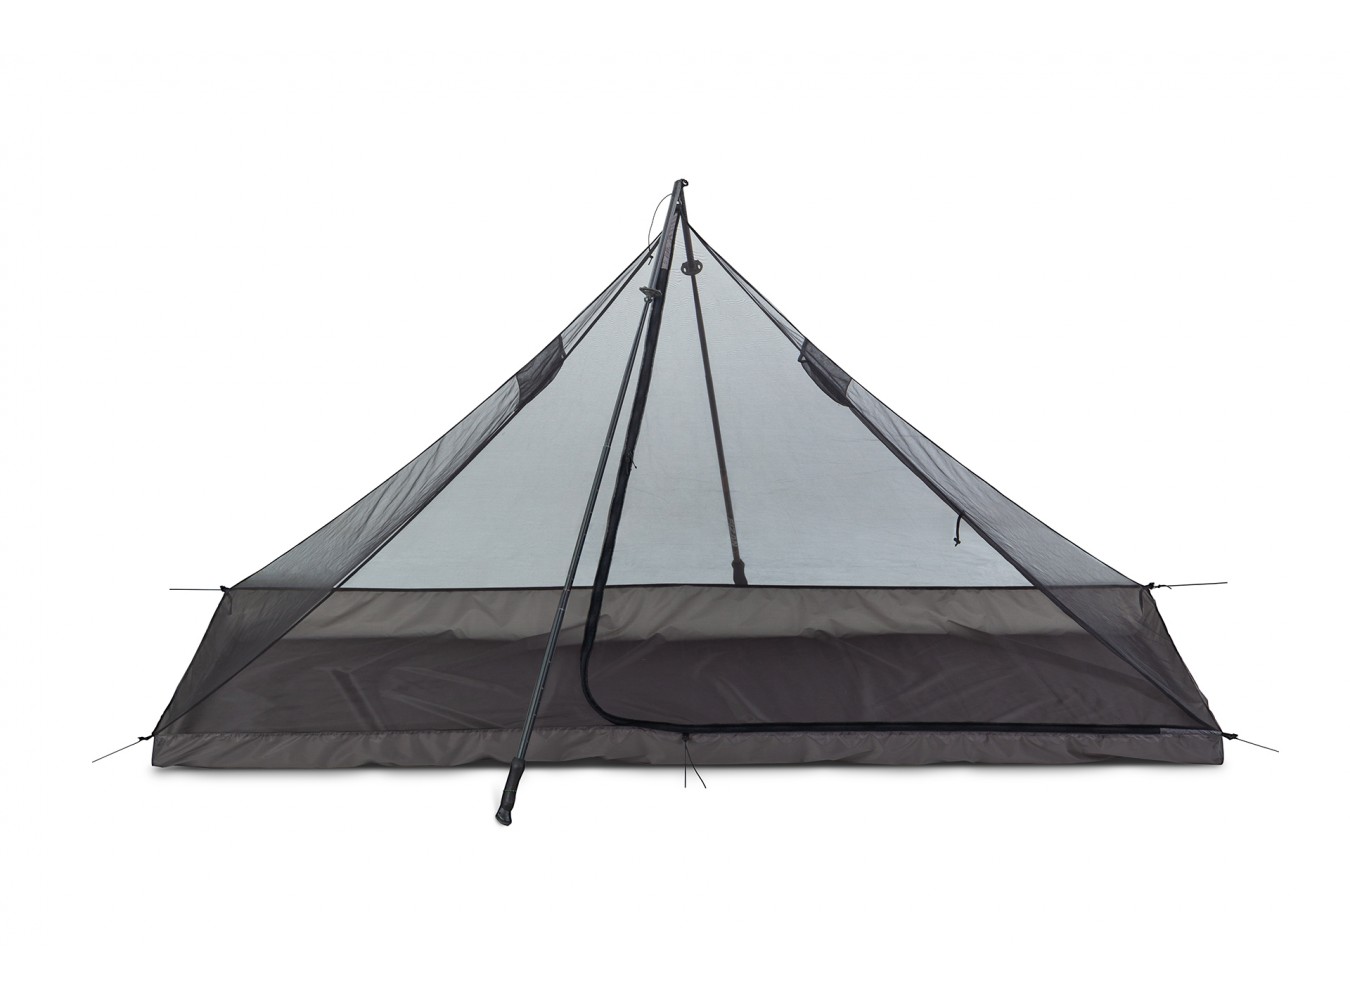 Liteway Pyra Omm Solo Mesh Shelter